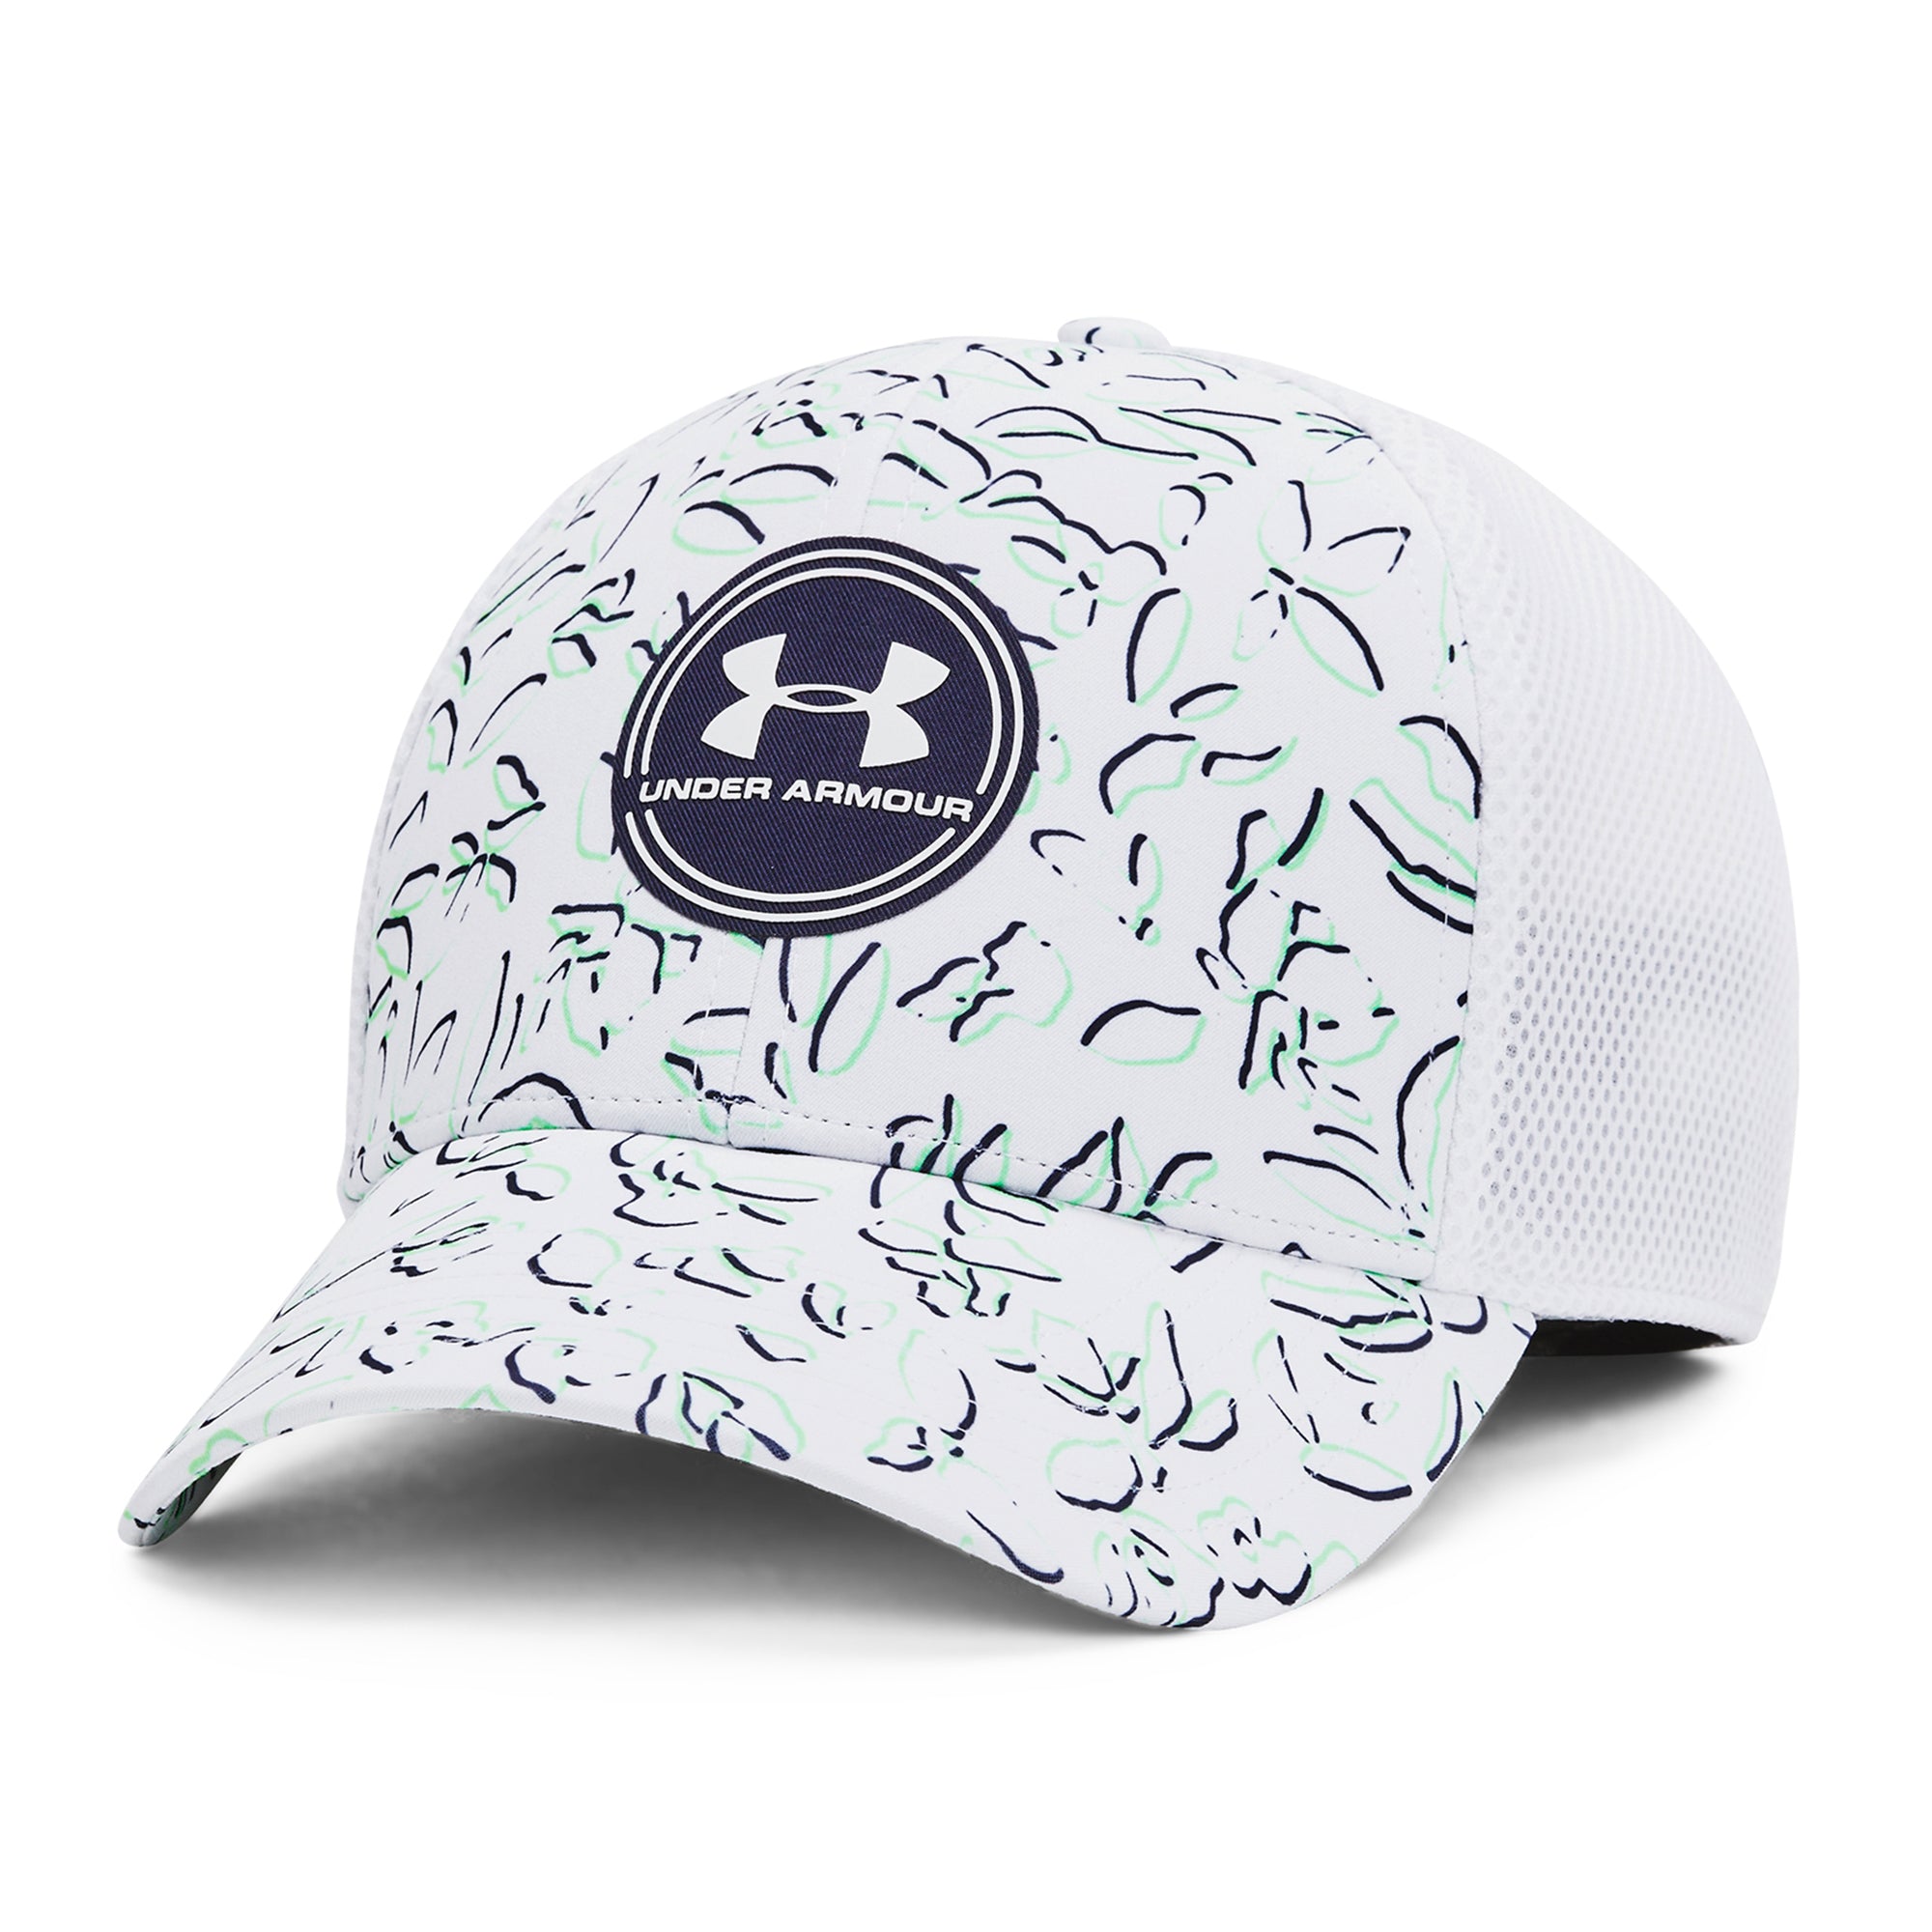 under-armour-golf-iso-chill-driver-mesh-cap-1369804-white-105